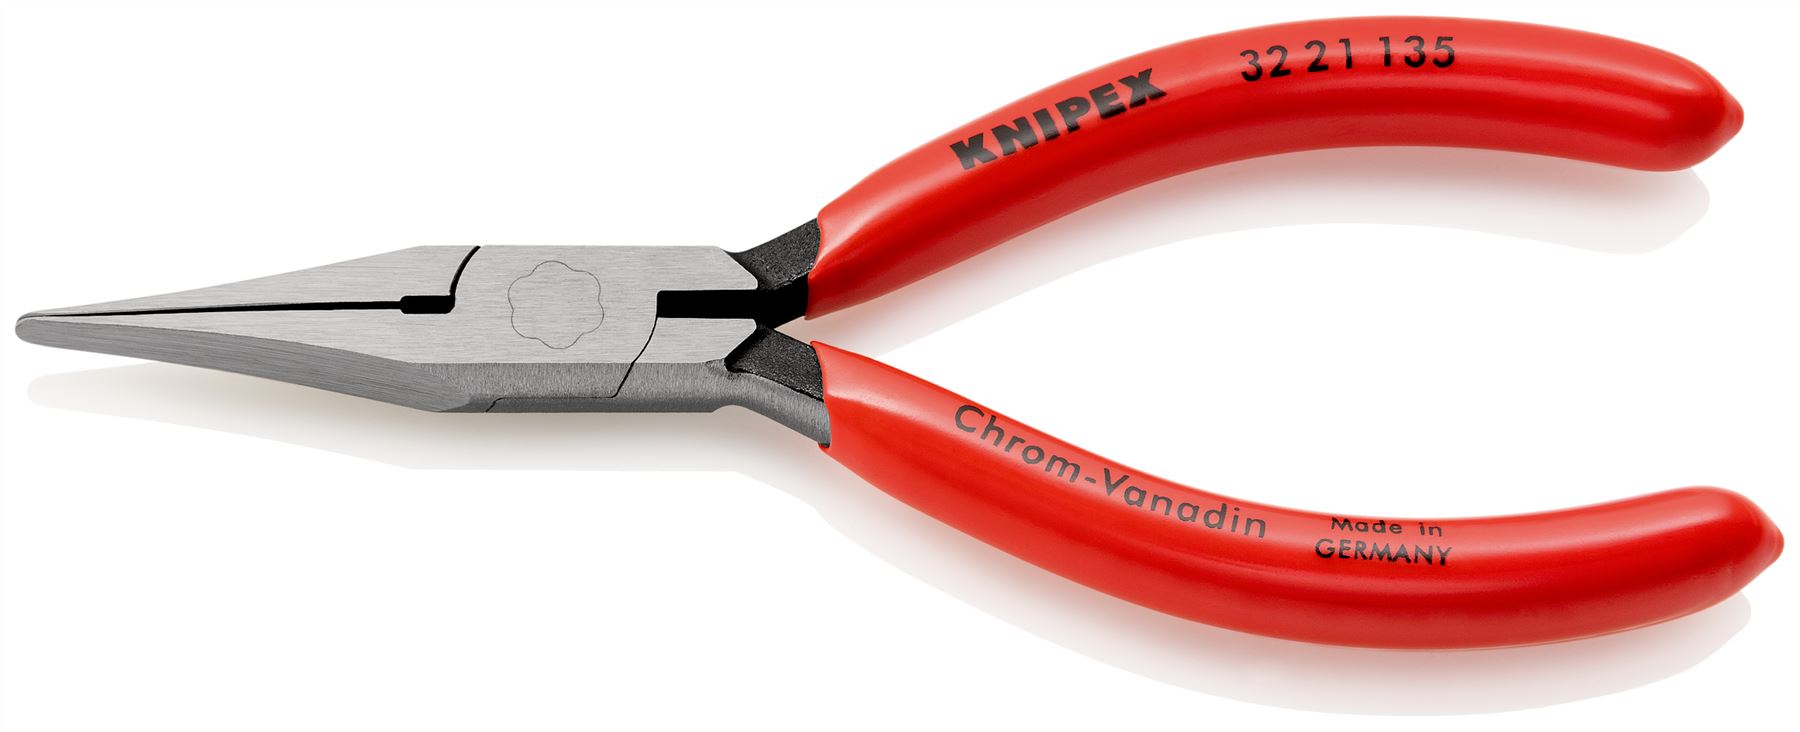 KNIPEX Relay Adjusting Gripping Pliers 135mm Plastic Coated 32 21 135